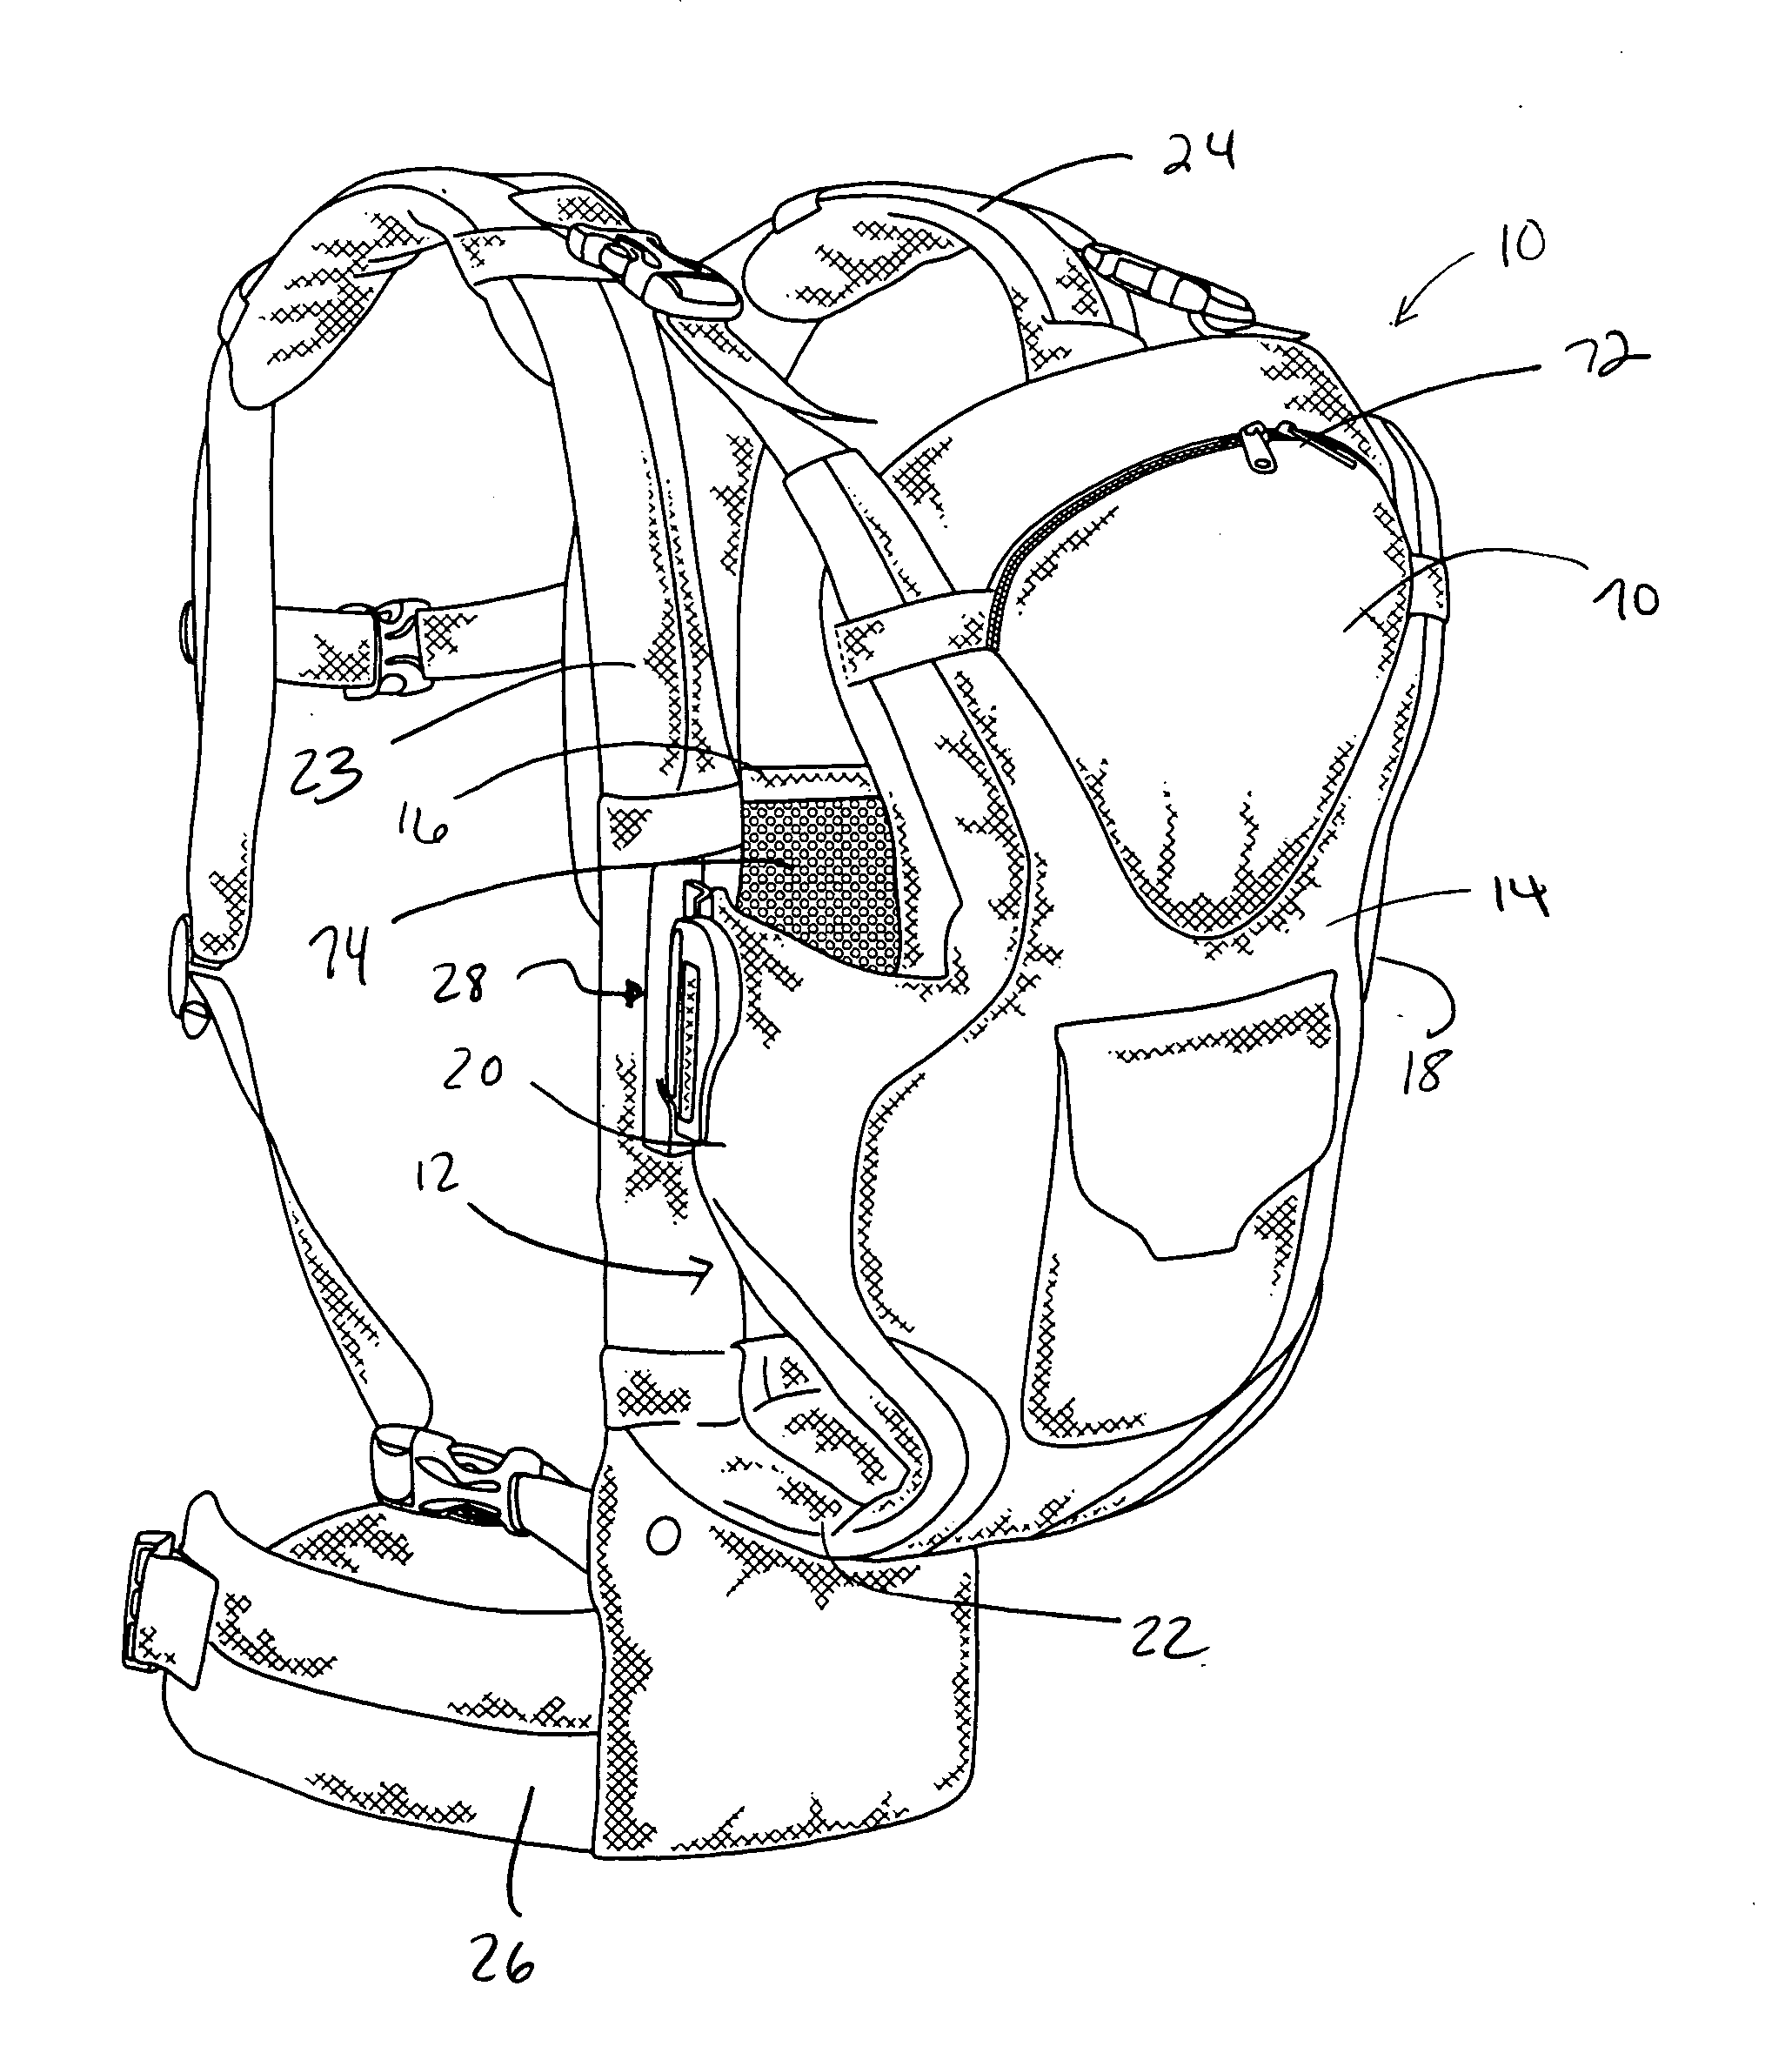 Child carrier with side buckle and venting